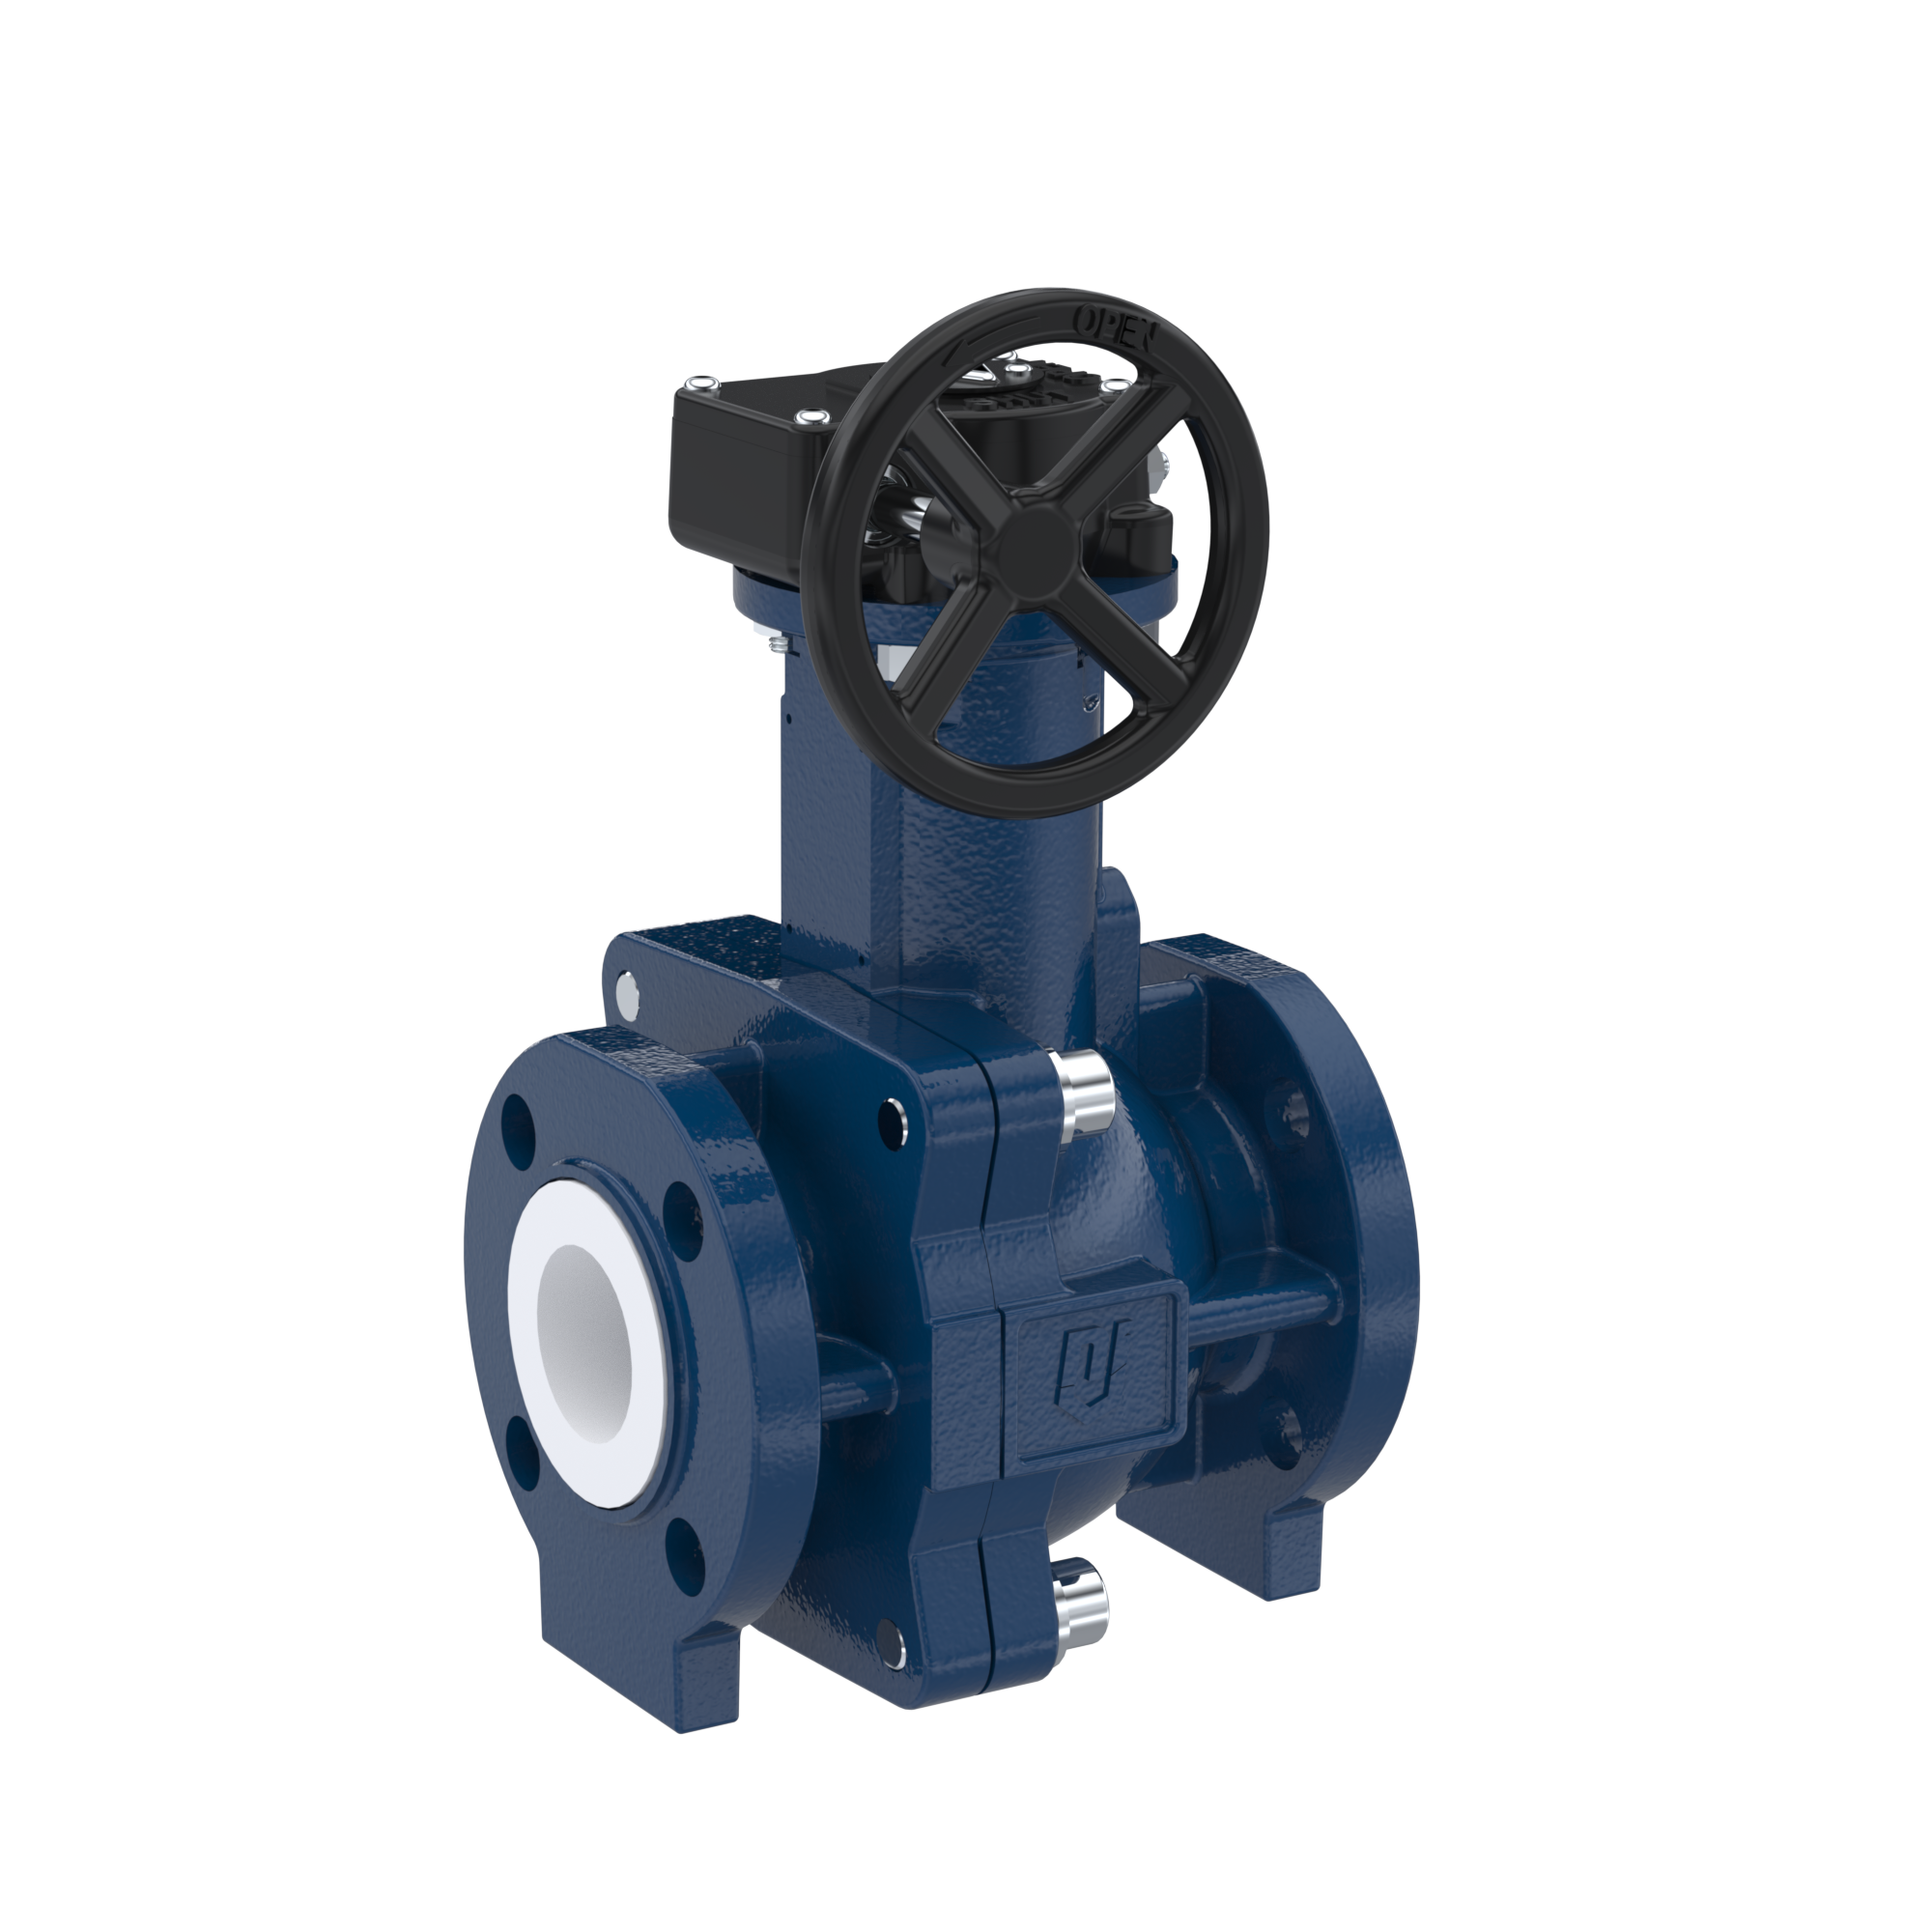 PFA-flange ball valve FK13 DN40 - 1 1/2" inch ANSI 150 made of spheroidal graphite cast iron with worm gear